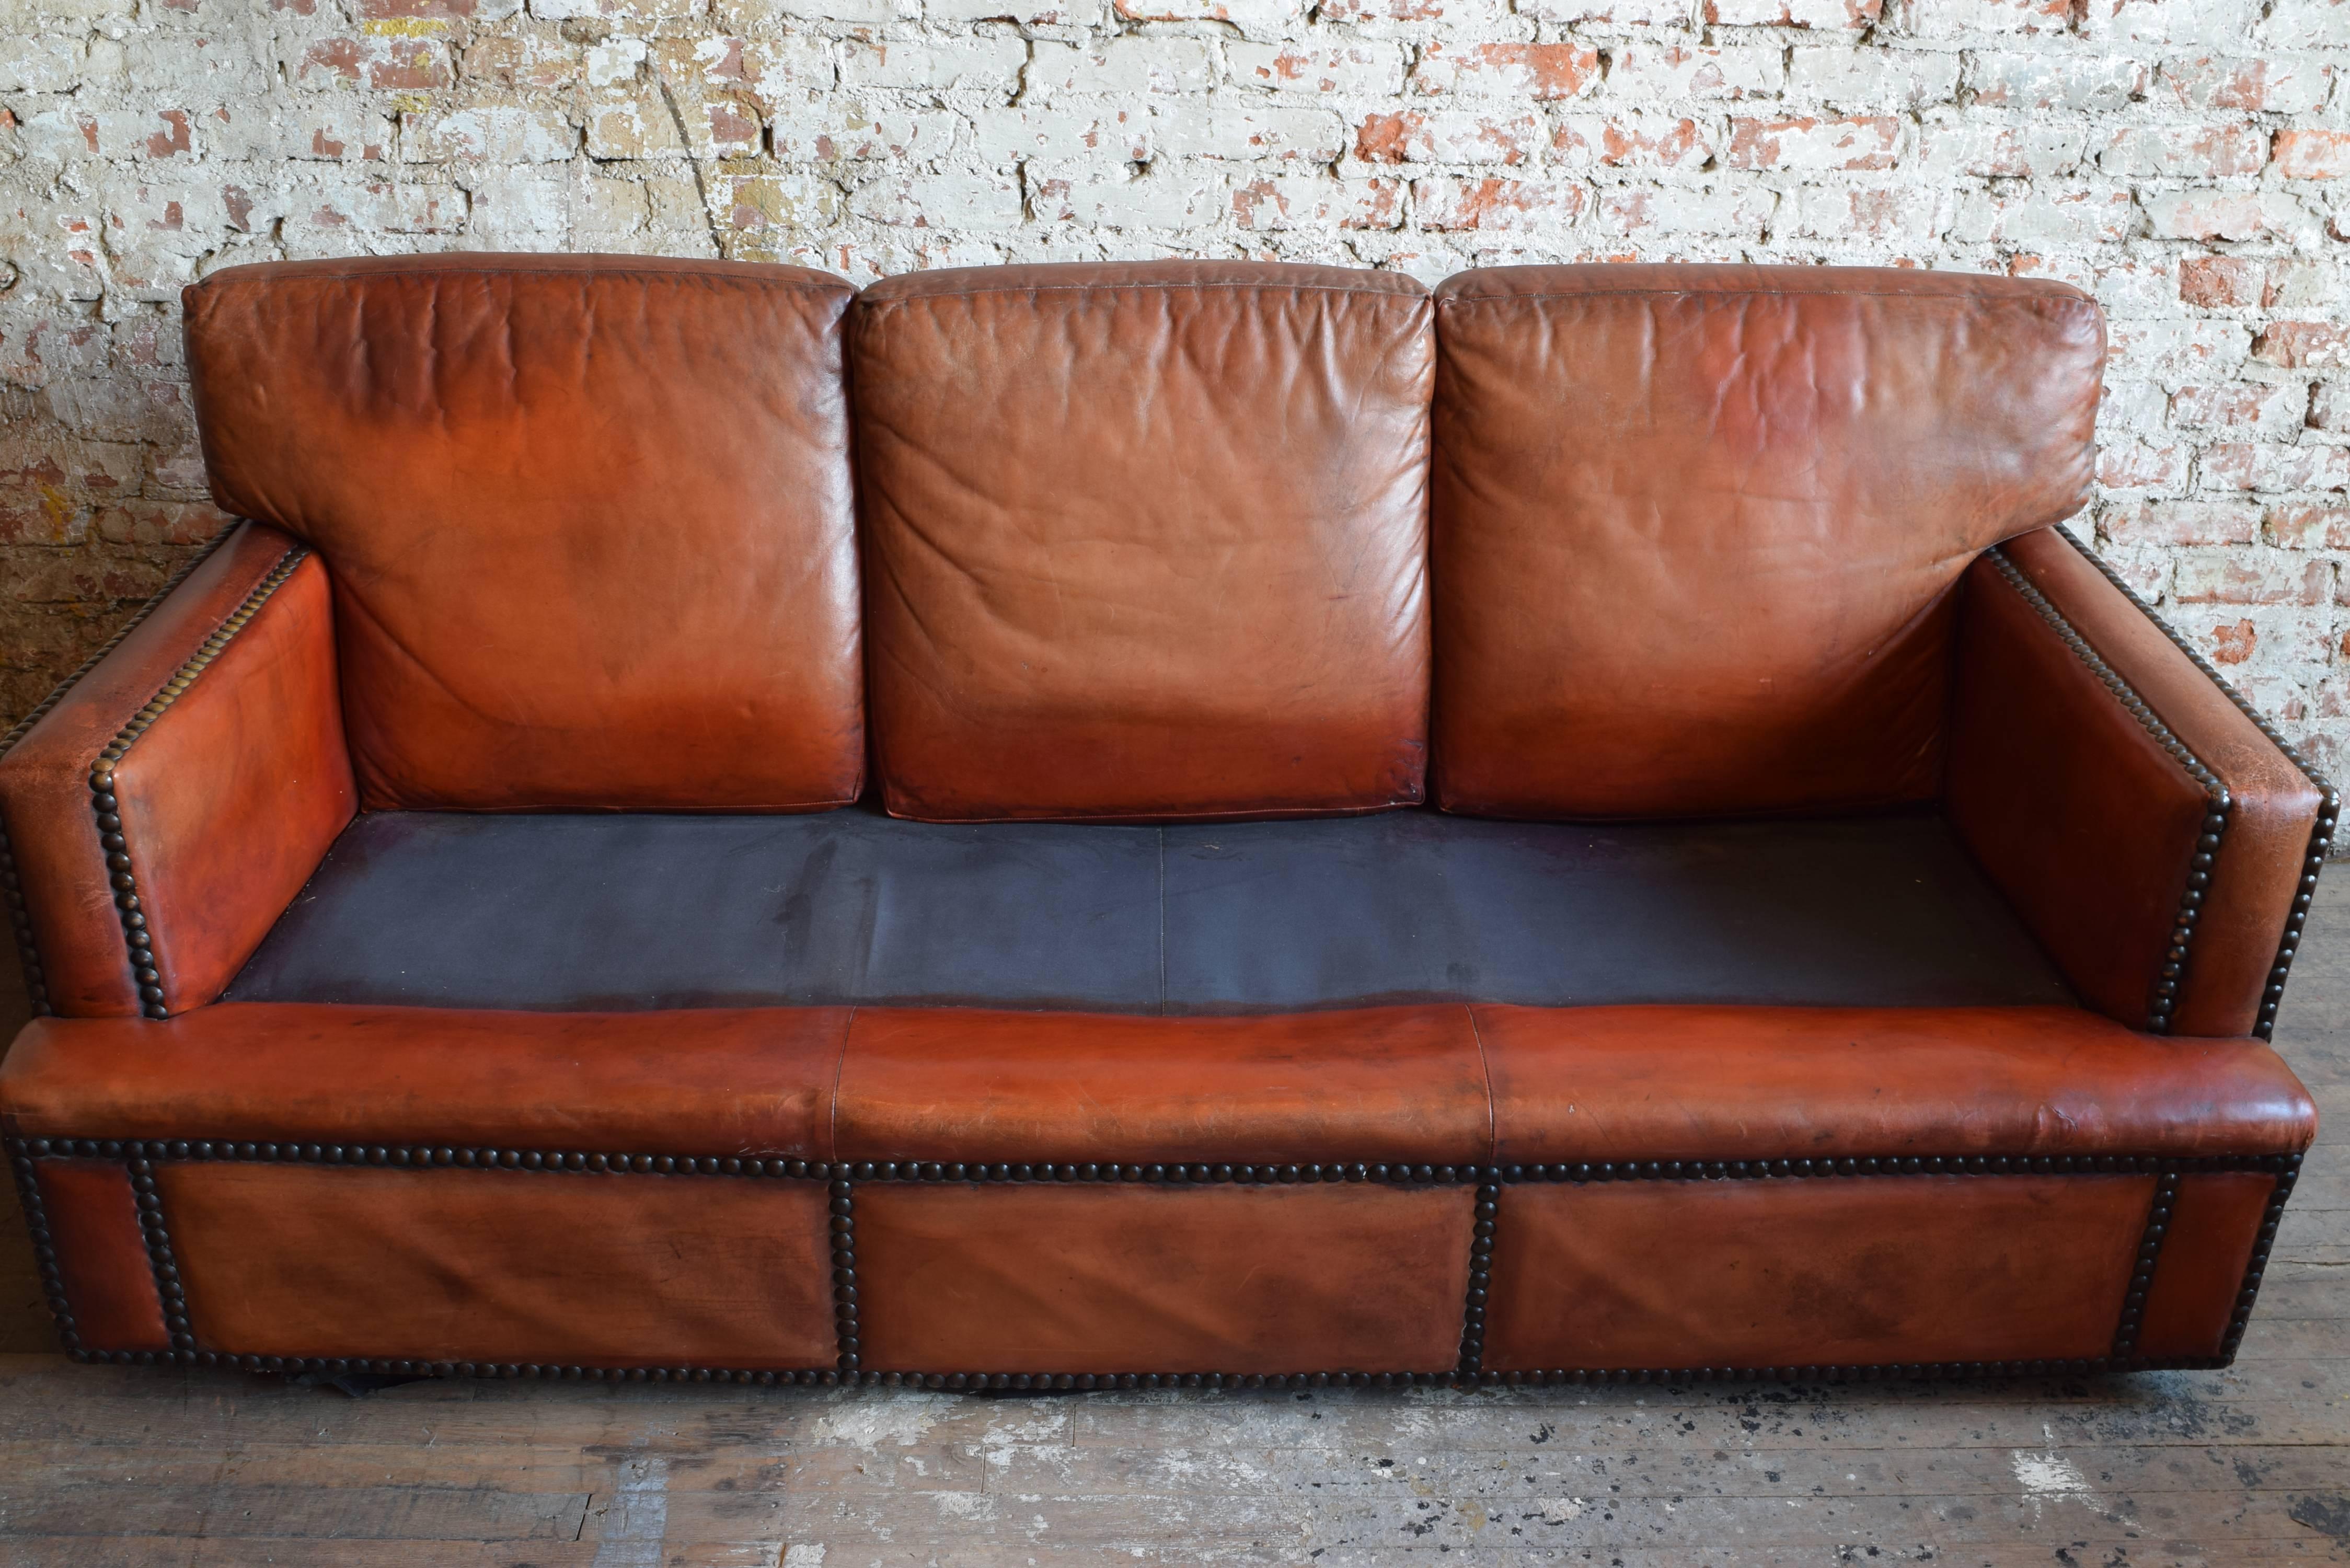 English Leather Upholstered and Nailhead Decorated Sofa, Mid-20th Century 3